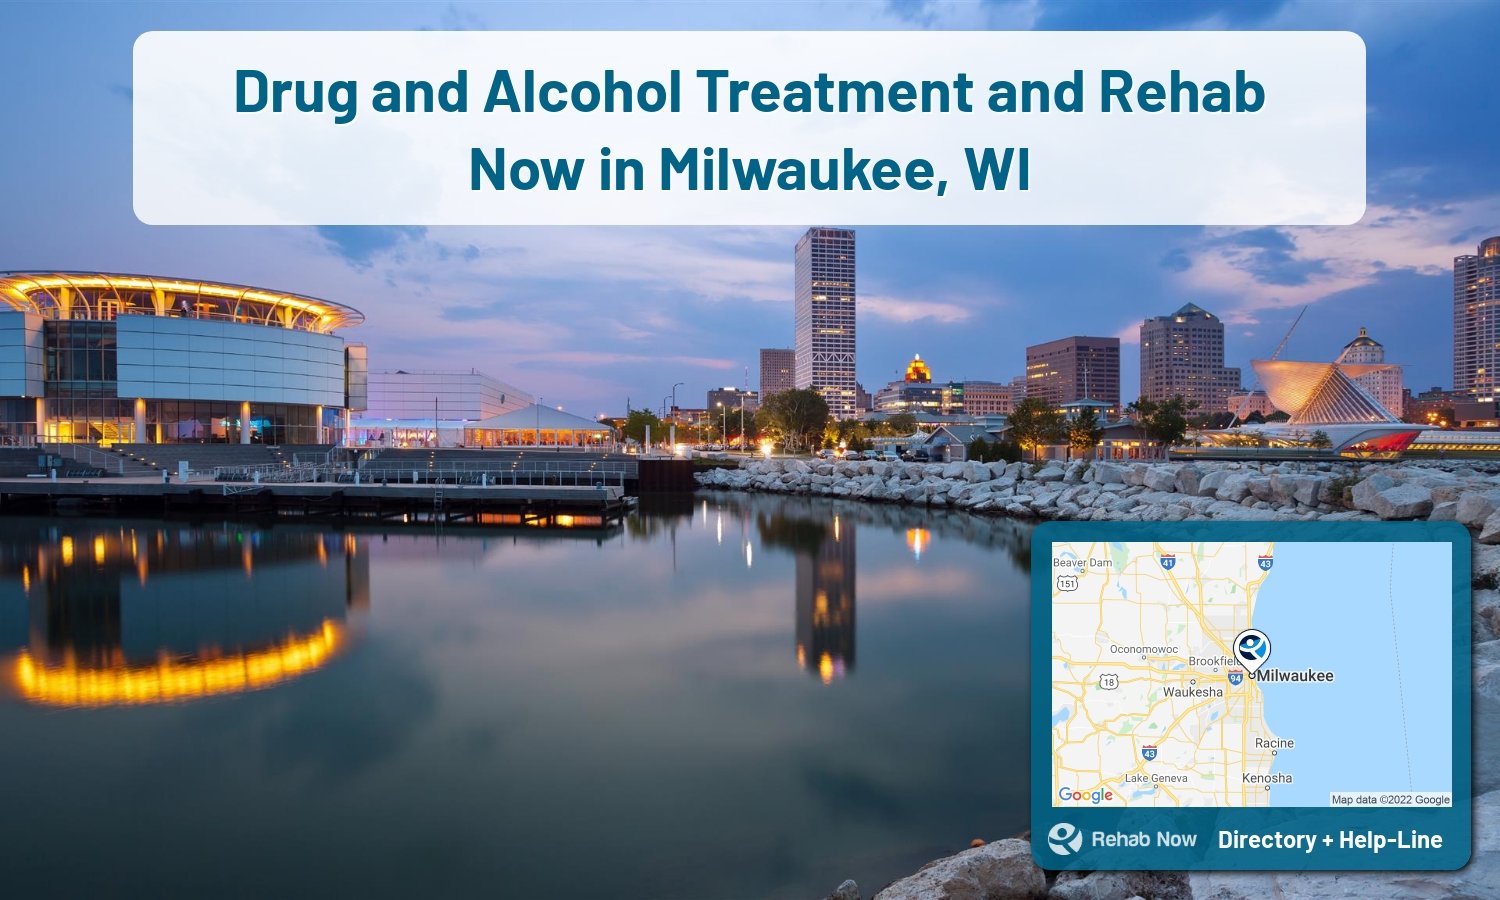 View options, availability, treatment methods, and more, for drug rehab and alcohol treatment in Milwaukee, Wisconsin